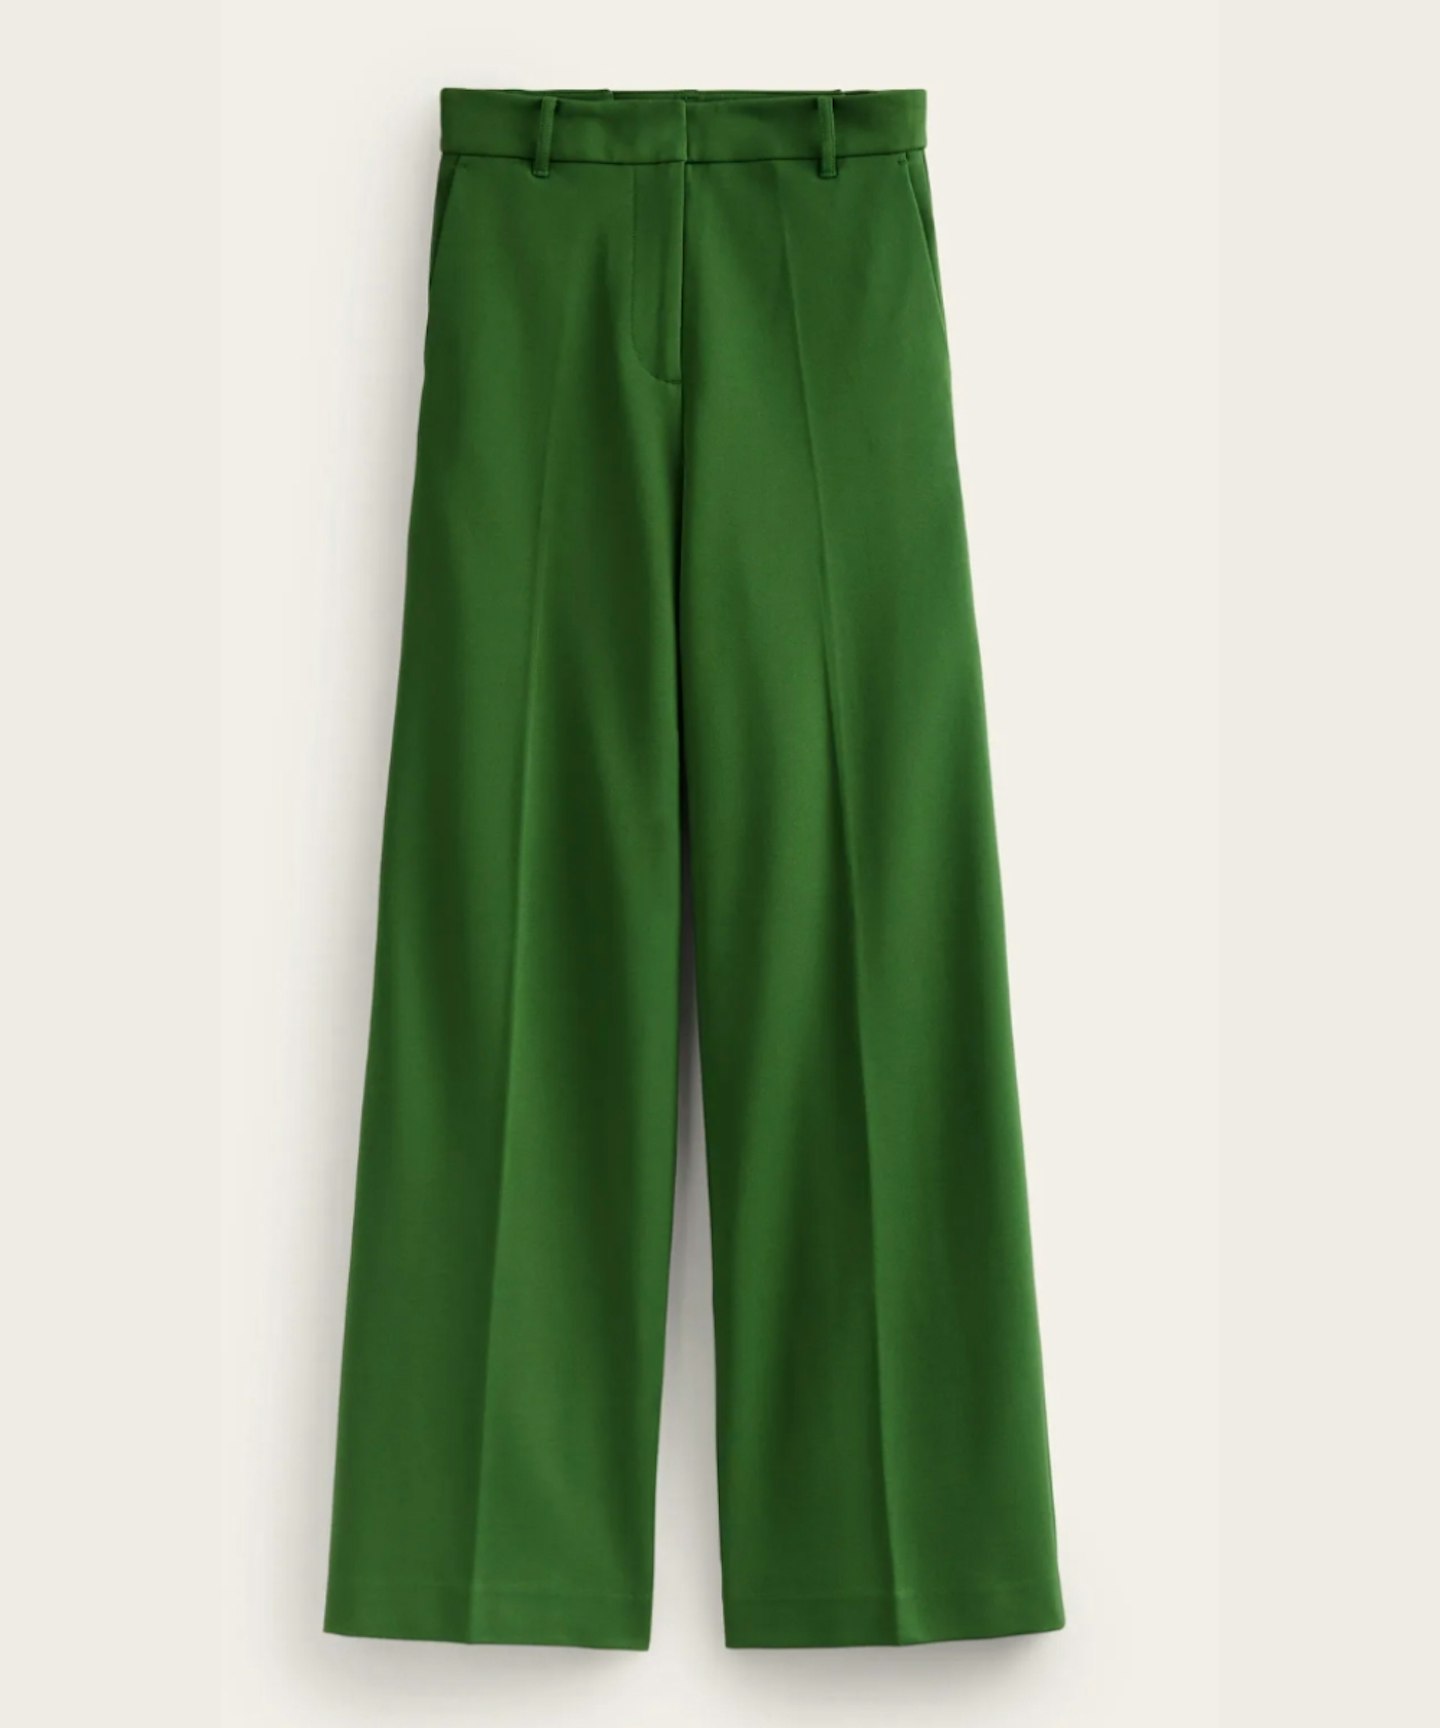 Boden Westbourne Ponte Trousers